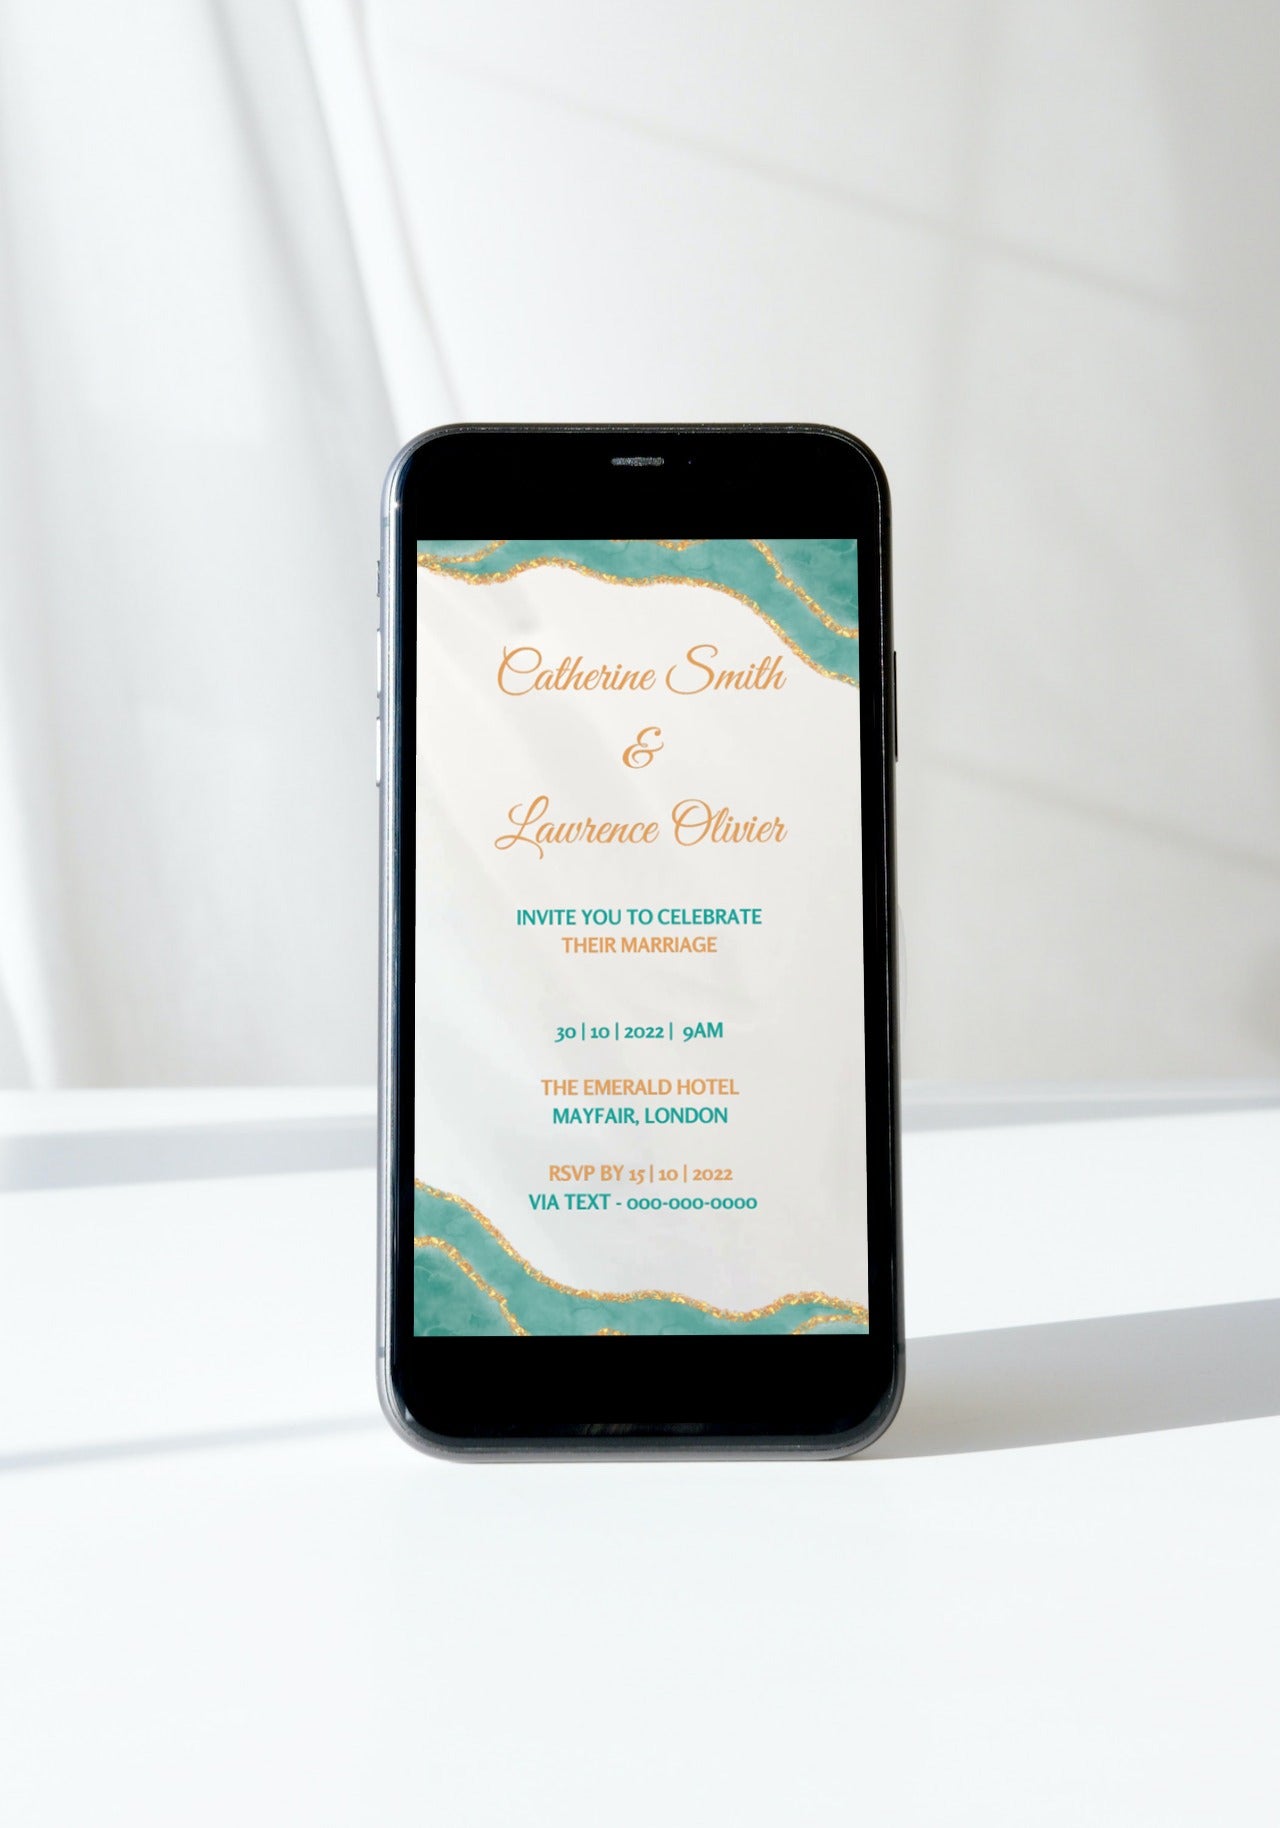 Teal Blue Agate wedding video invitation displayed on a smartphone, showcasing customizable text and design elements for easy personalization via Canva.